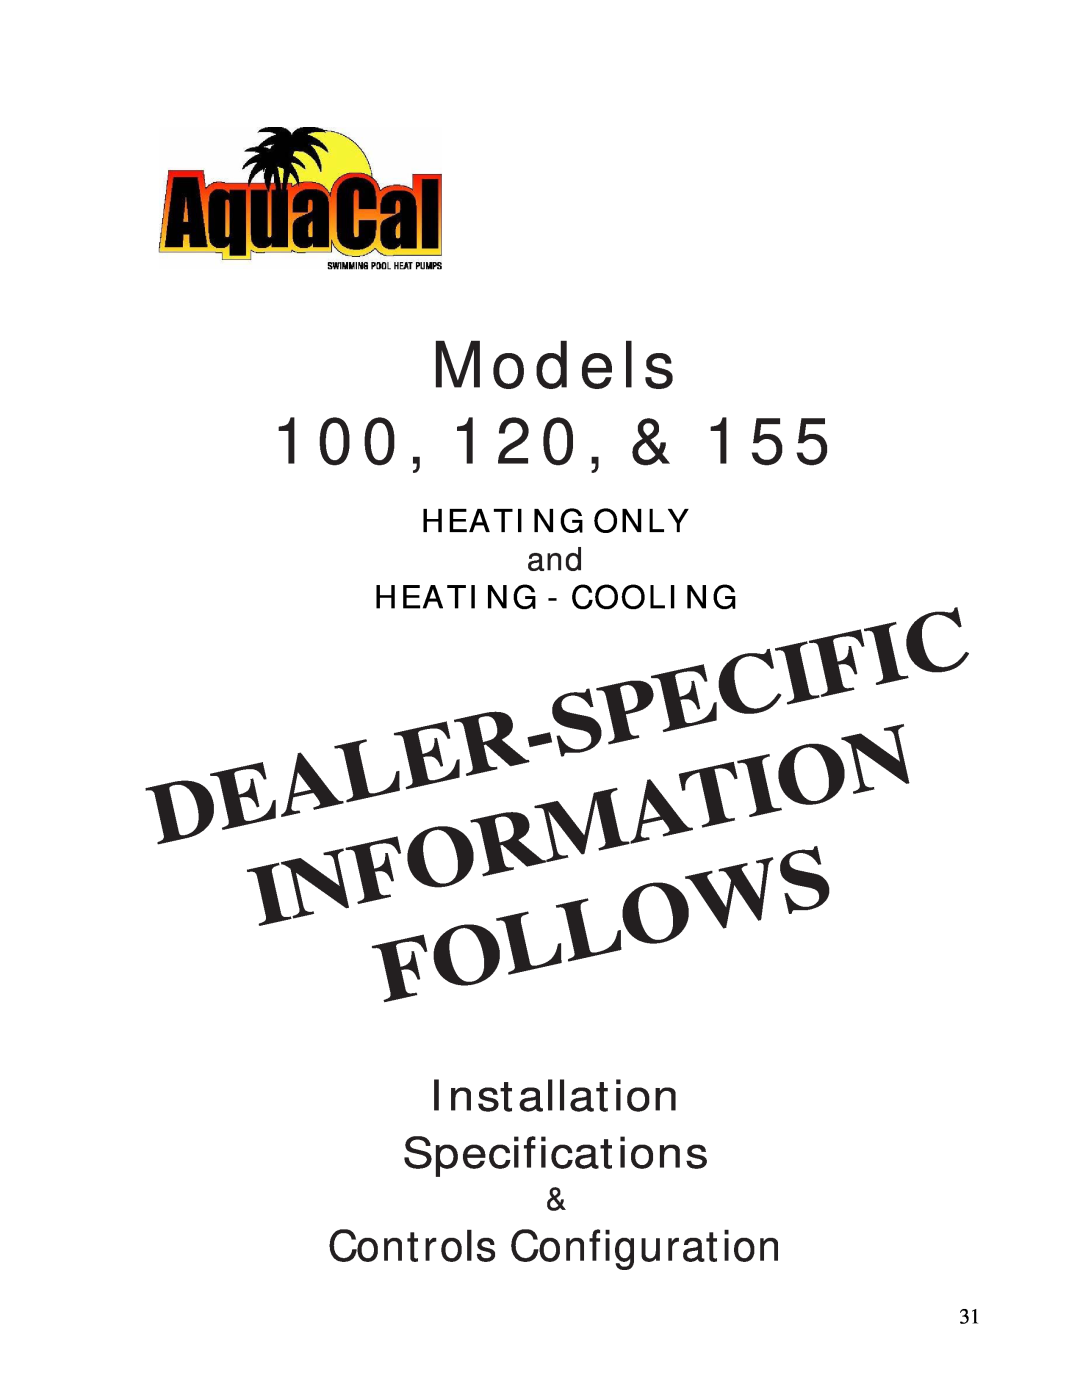 Aquacal 120, 155 Specificdealerinformation Follows, Models 100, Installation Specifications, Controls Configuration 